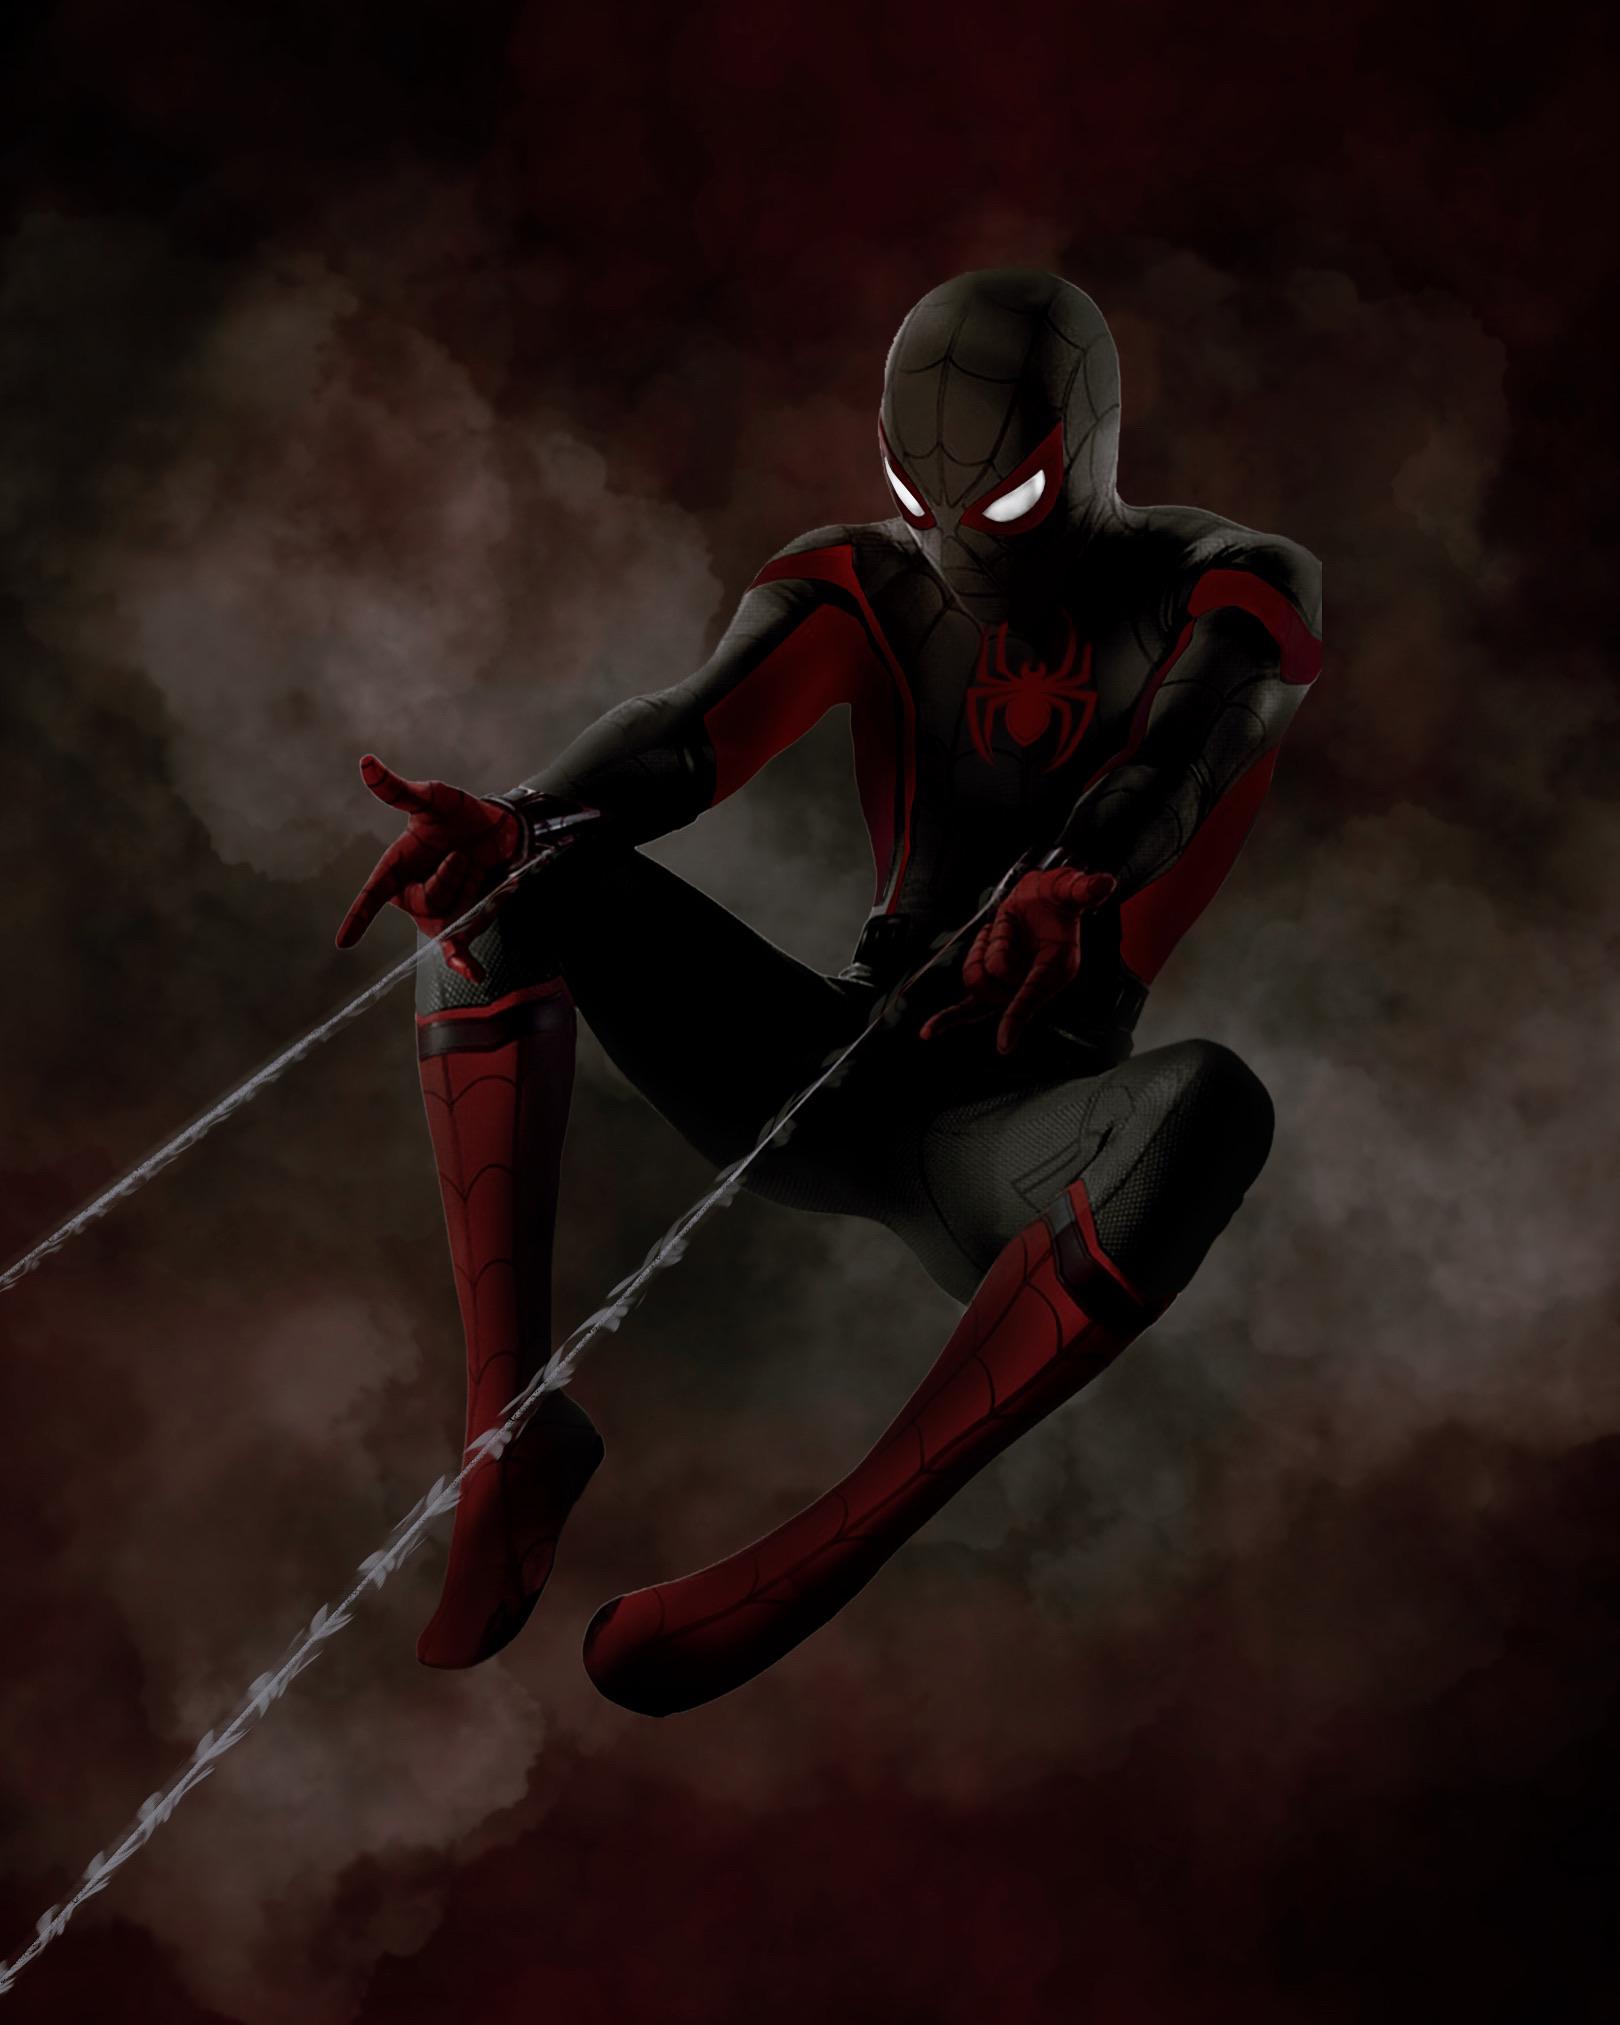 Concept Design I Put Together For Ultimate Spider Man Suit Worn By Miles Morales If He Appears In Future MCU Films